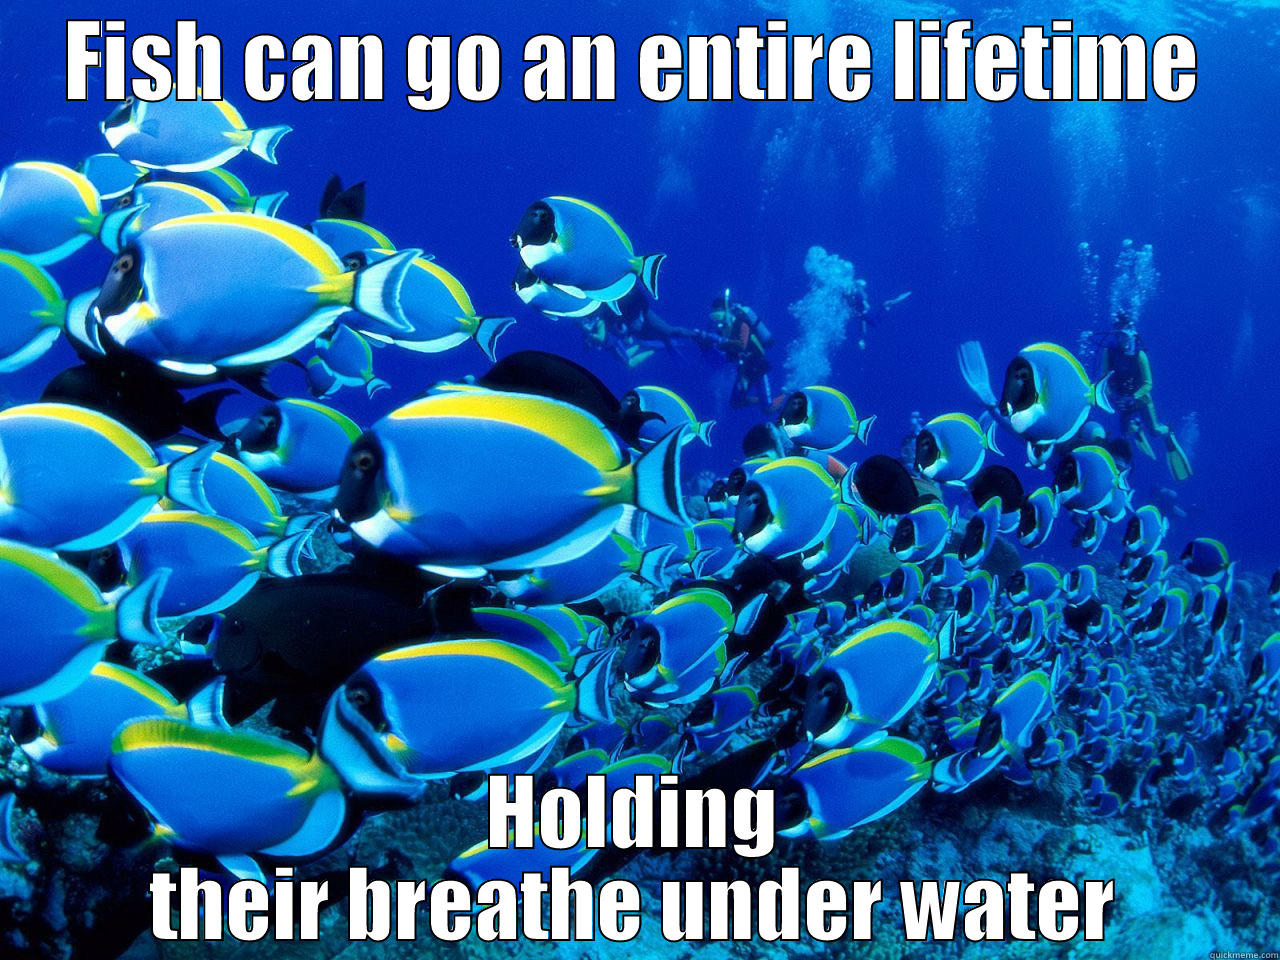 Fishy Fish stories - FISH CAN GO AN ENTIRE LIFETIME HOLDING THEIR BREATHE UNDER WATER Misc